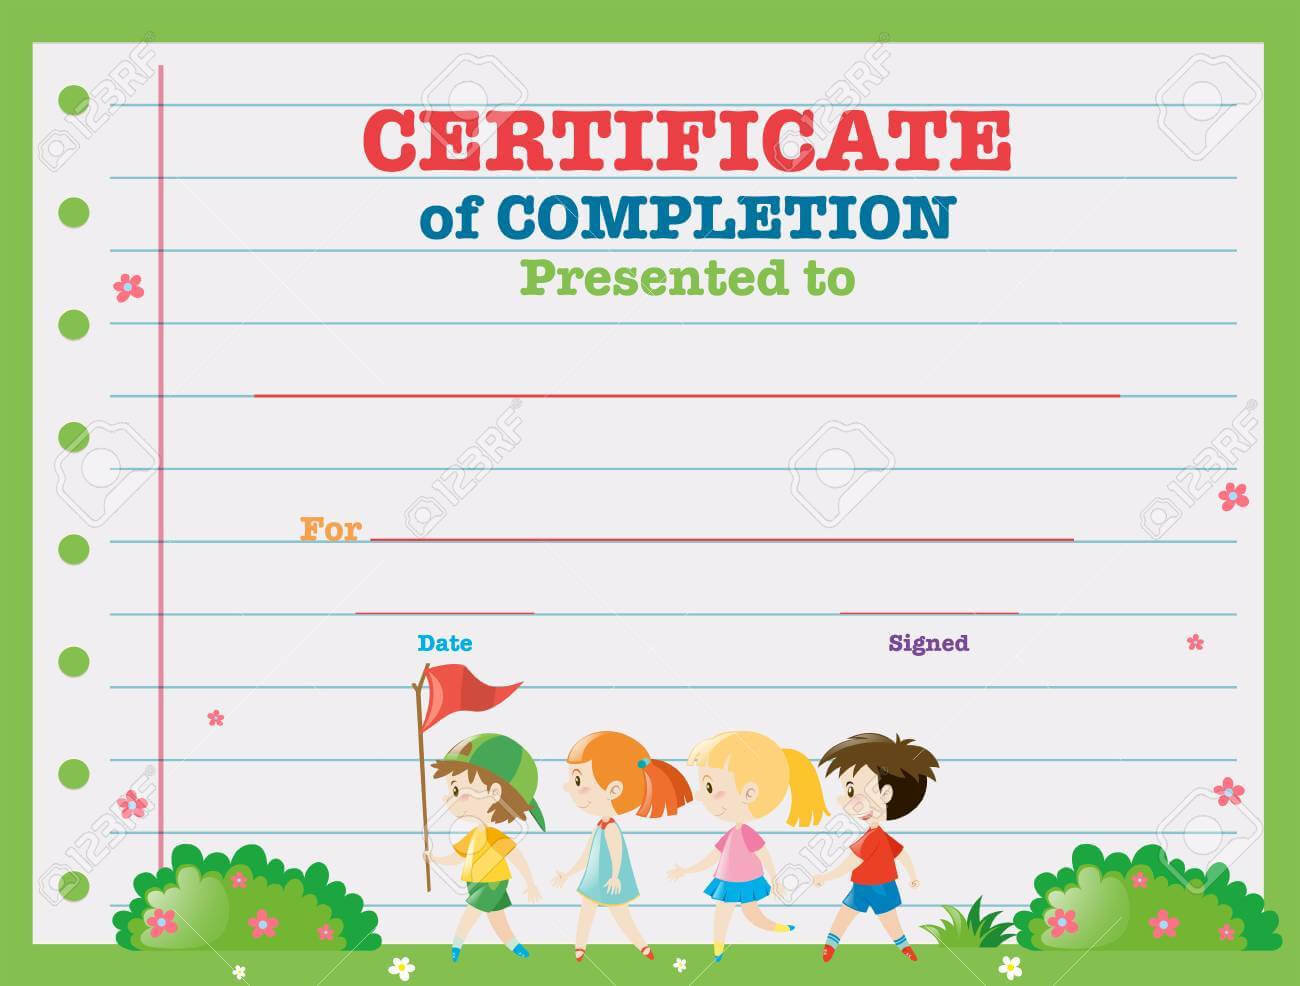 Certificate Template With Kids Walking In The Park Illustration In Walking Certificate Templates